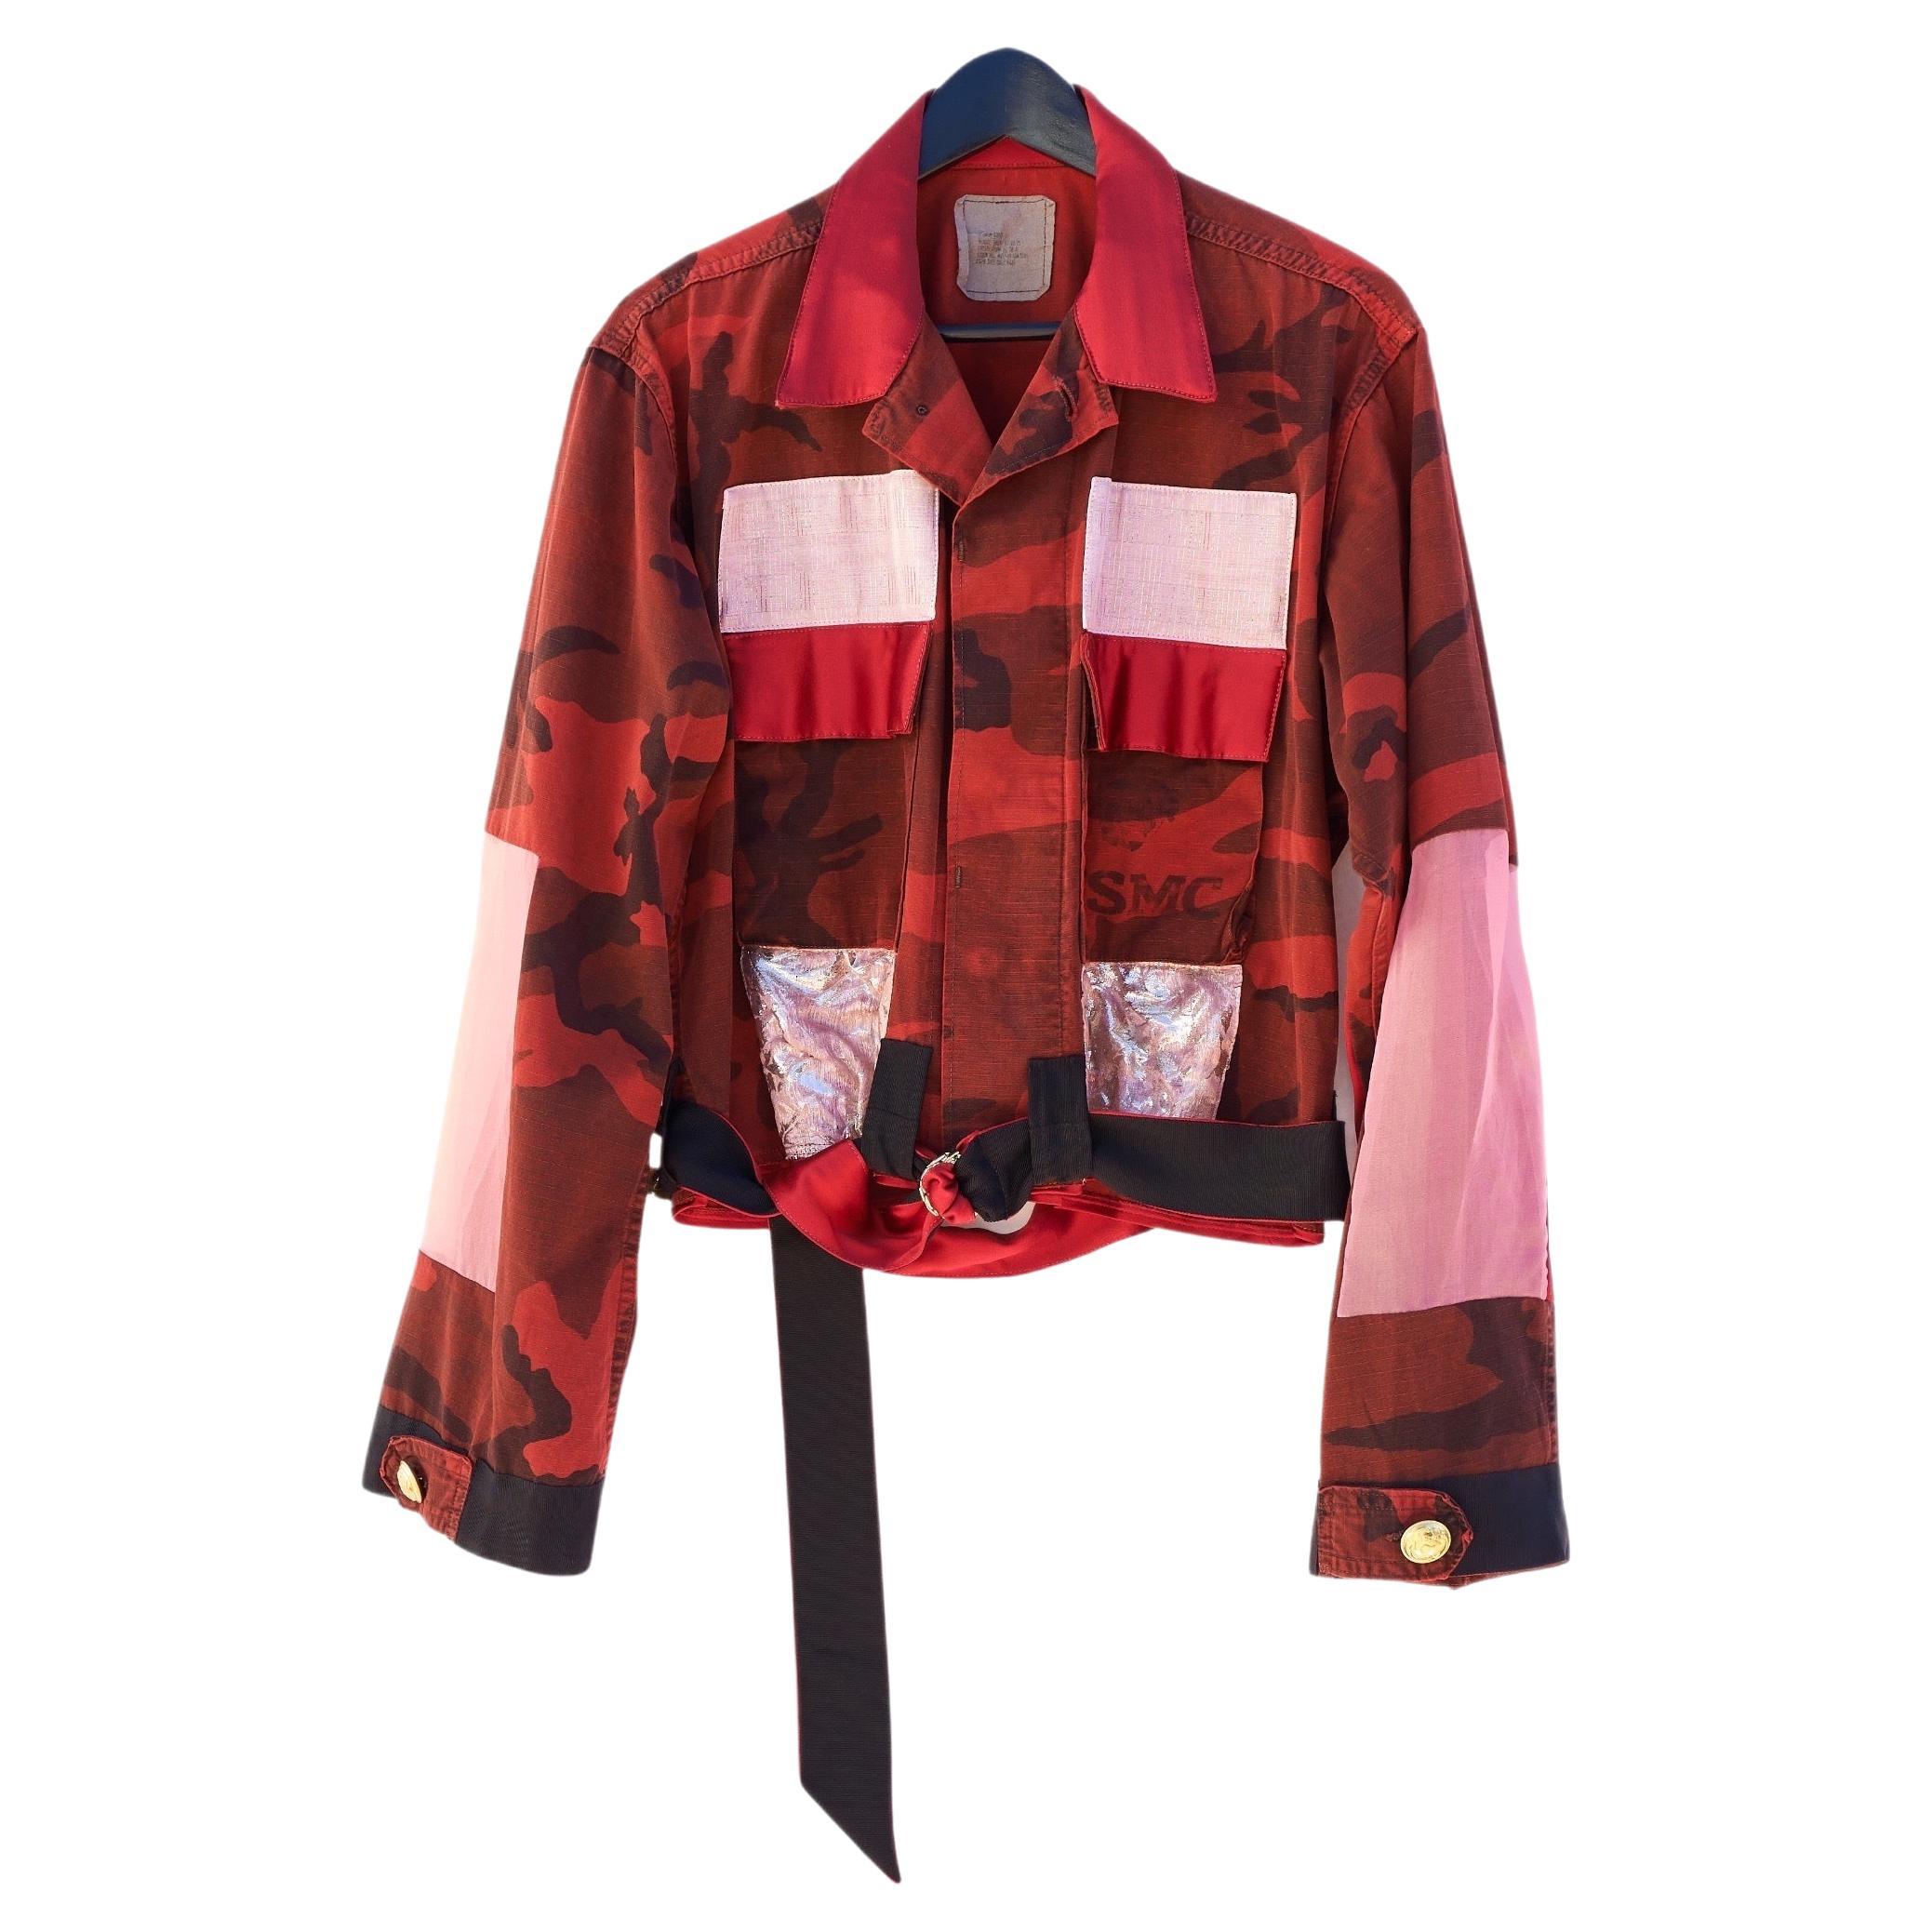 Designer J Dauphin 
Repurposed Vintage US Military Designer Jacket Camouflage Red 100% Silk Satin, 100% Pink Silk Sheer See-Through Organza,  Pink Silver Silk Brocade made as a Patch Work. Long Belt in Red Satin and Black Silk Gros Grains

Gold tone